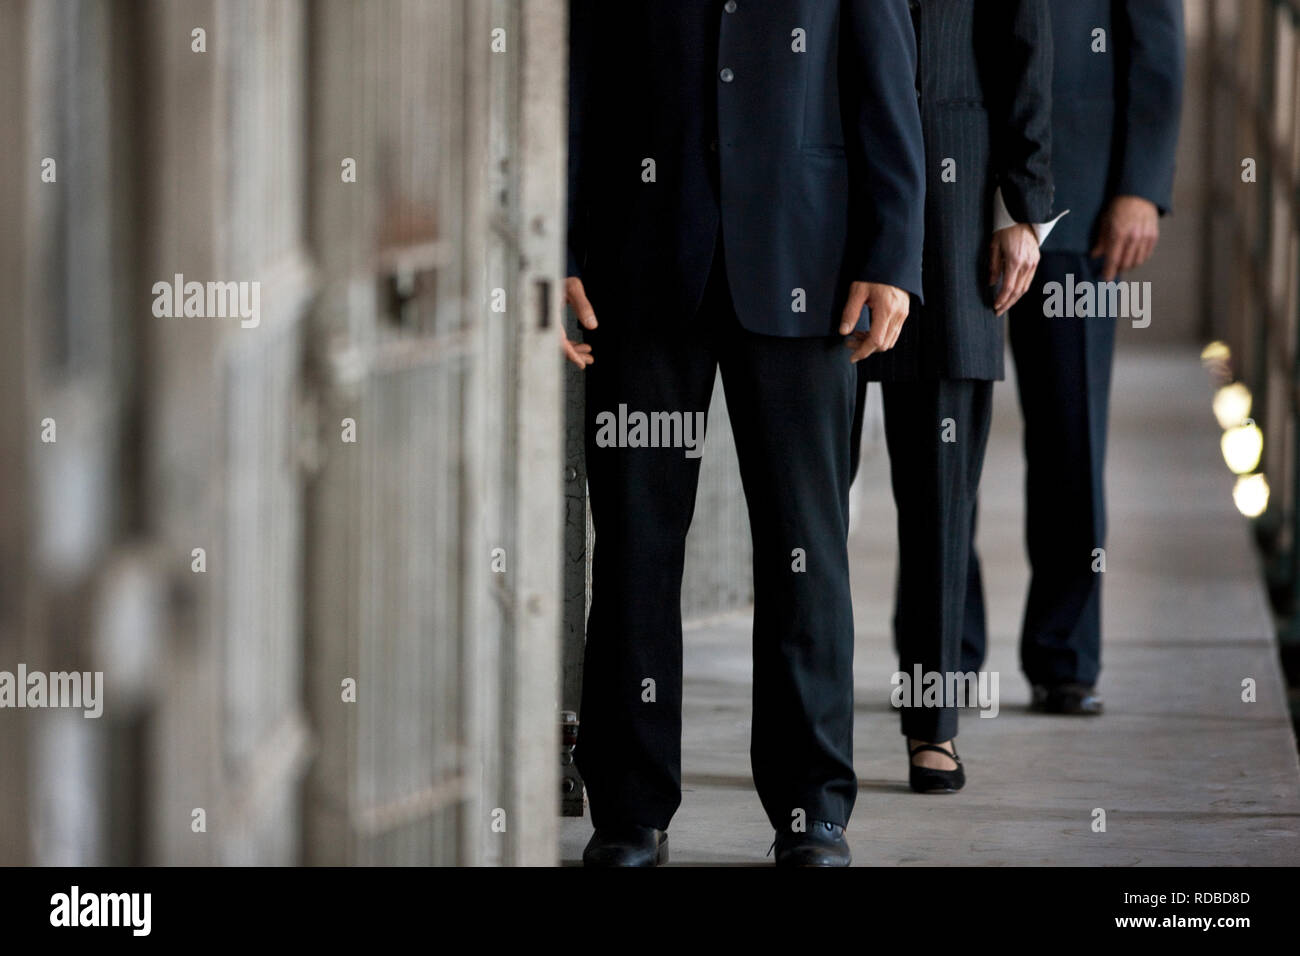 Three suited businesspeople standing next to a jail cell. Stock Photo